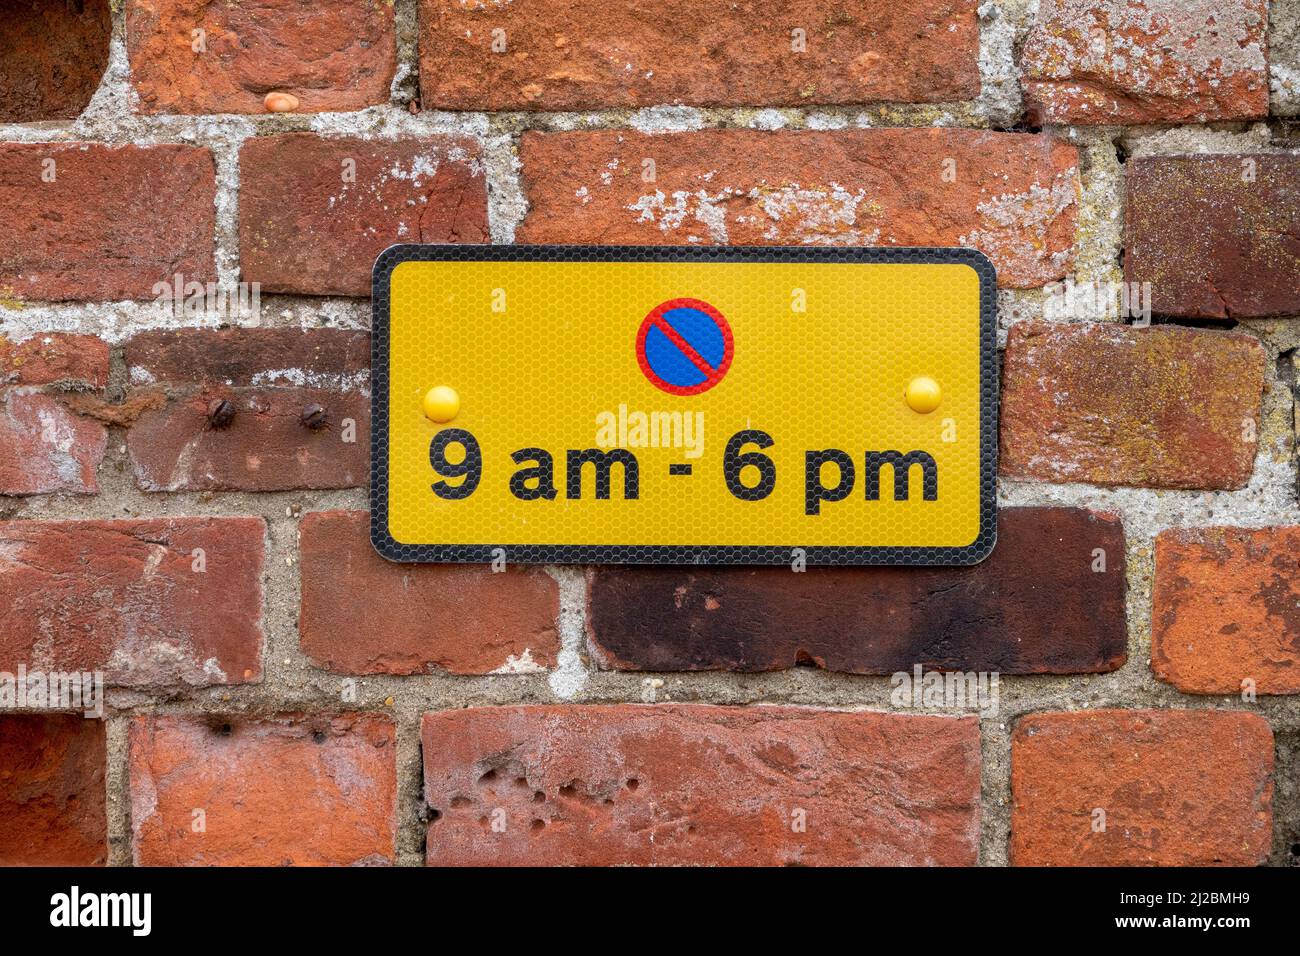 Small rectangular parking restriction sign black on yellow with red and blue symbol for the hours of 9am to 6pm mounted on a red brick wall Stock Photo